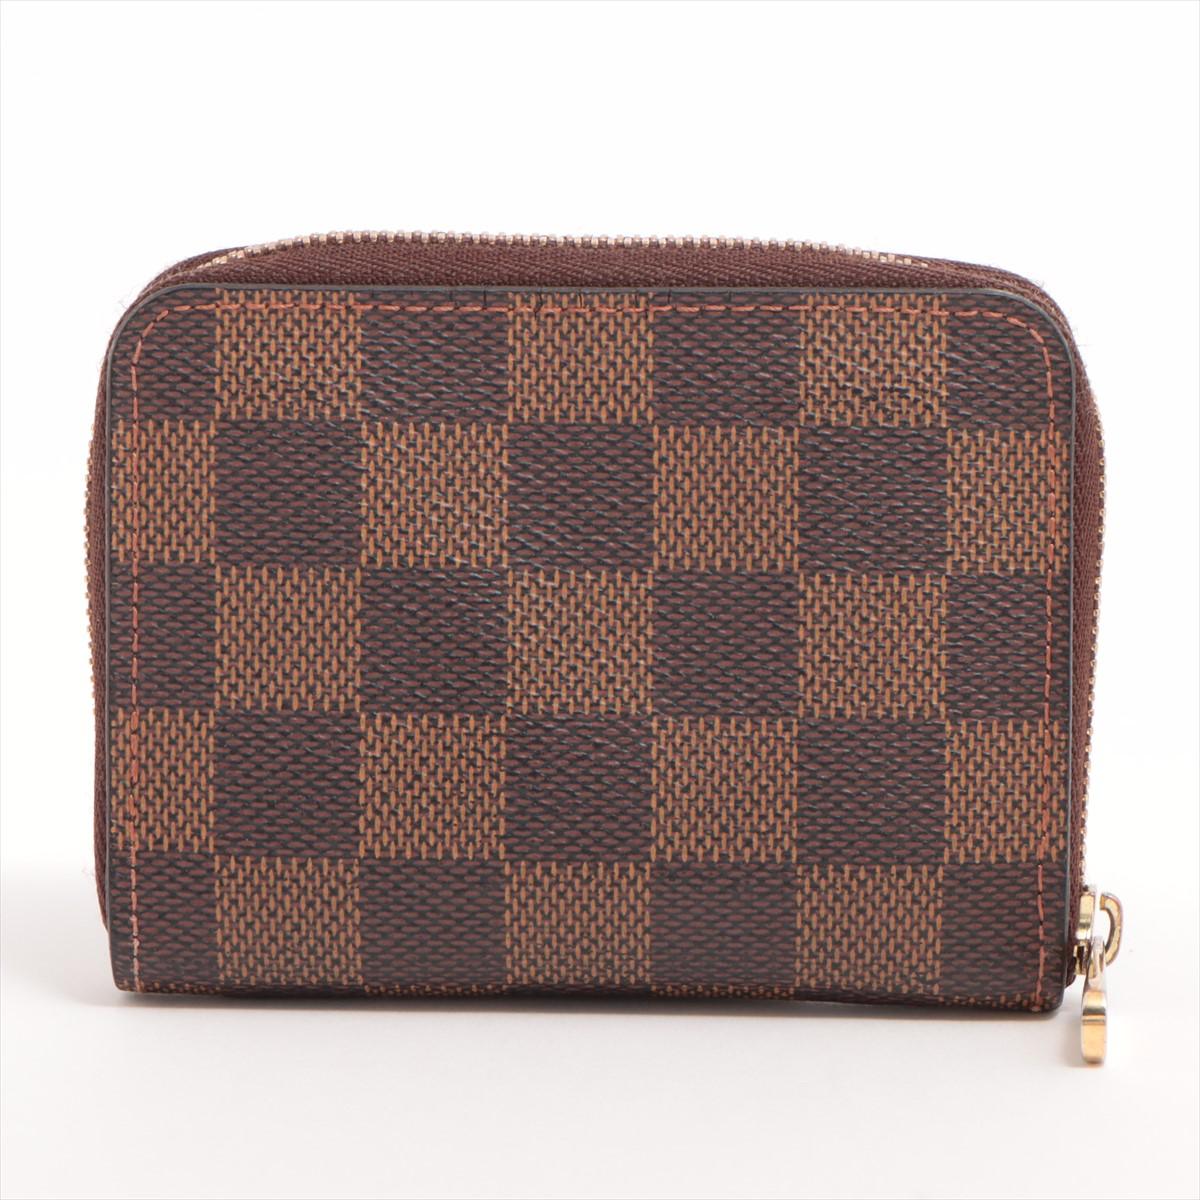 Louis Vuitton Damier Ebene Zippy Coin Purse In Good Condition For Sale In Indianapolis, IN